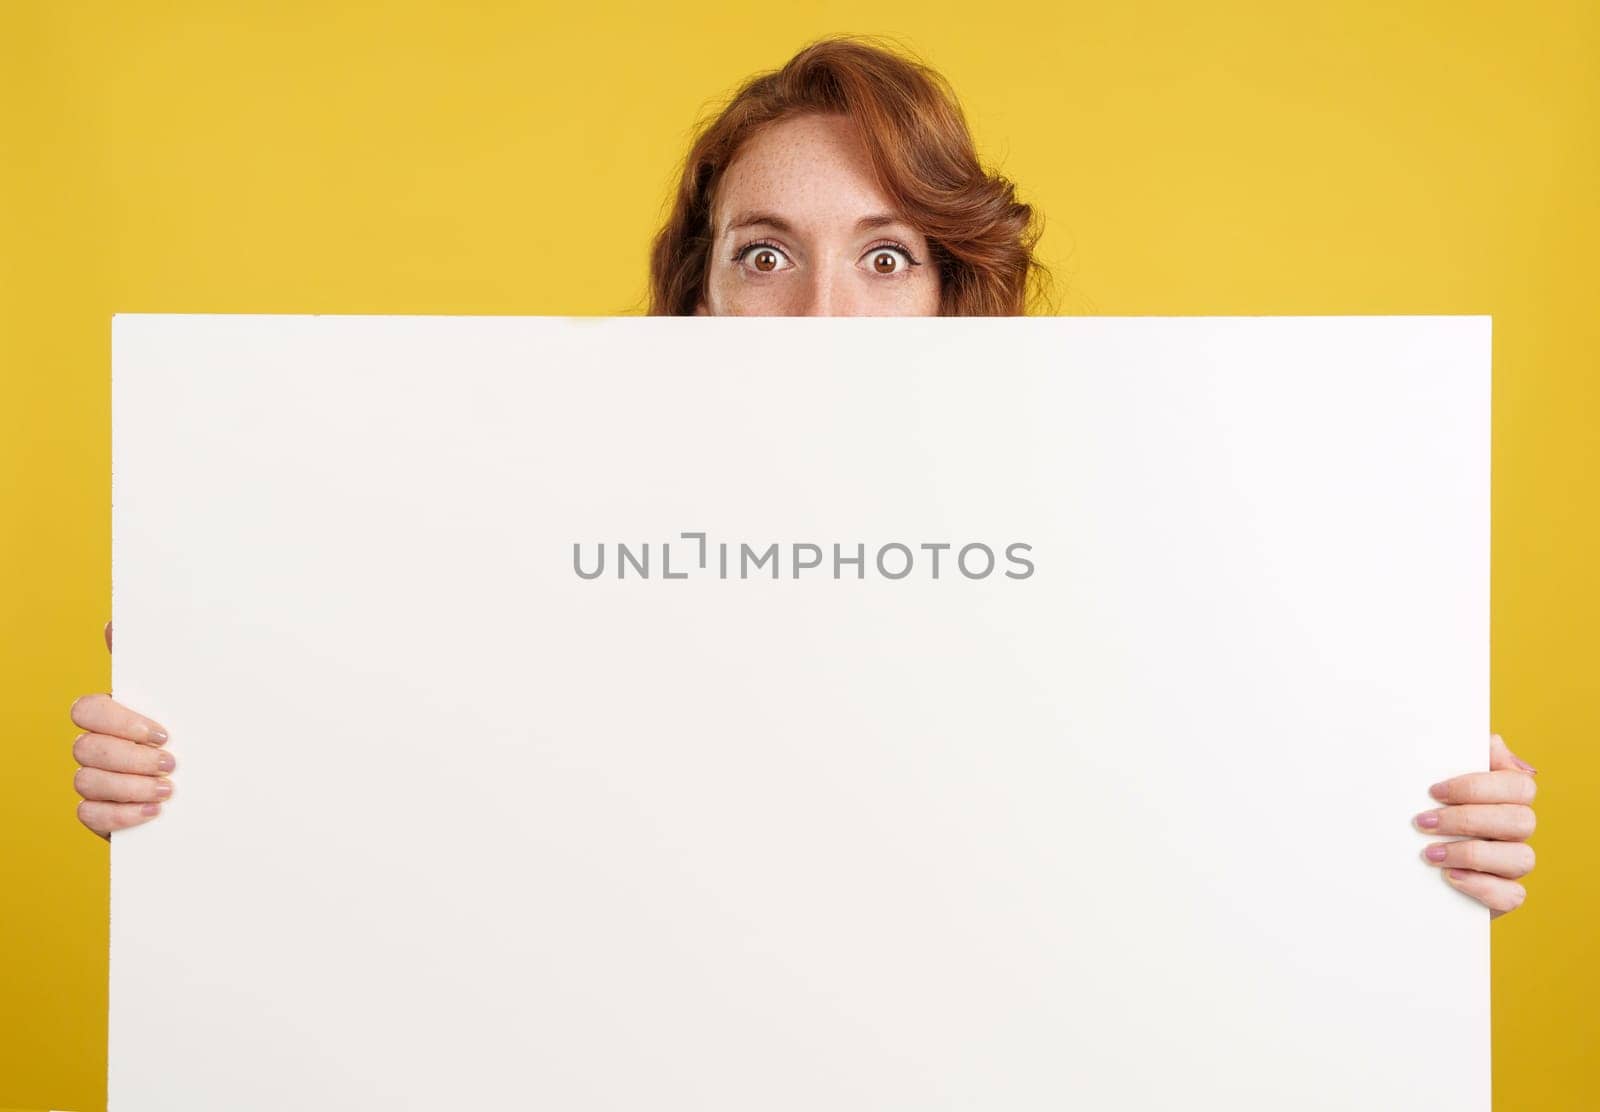 Surprised redheaded woman hiding behind a blank panel in studio with yellow background